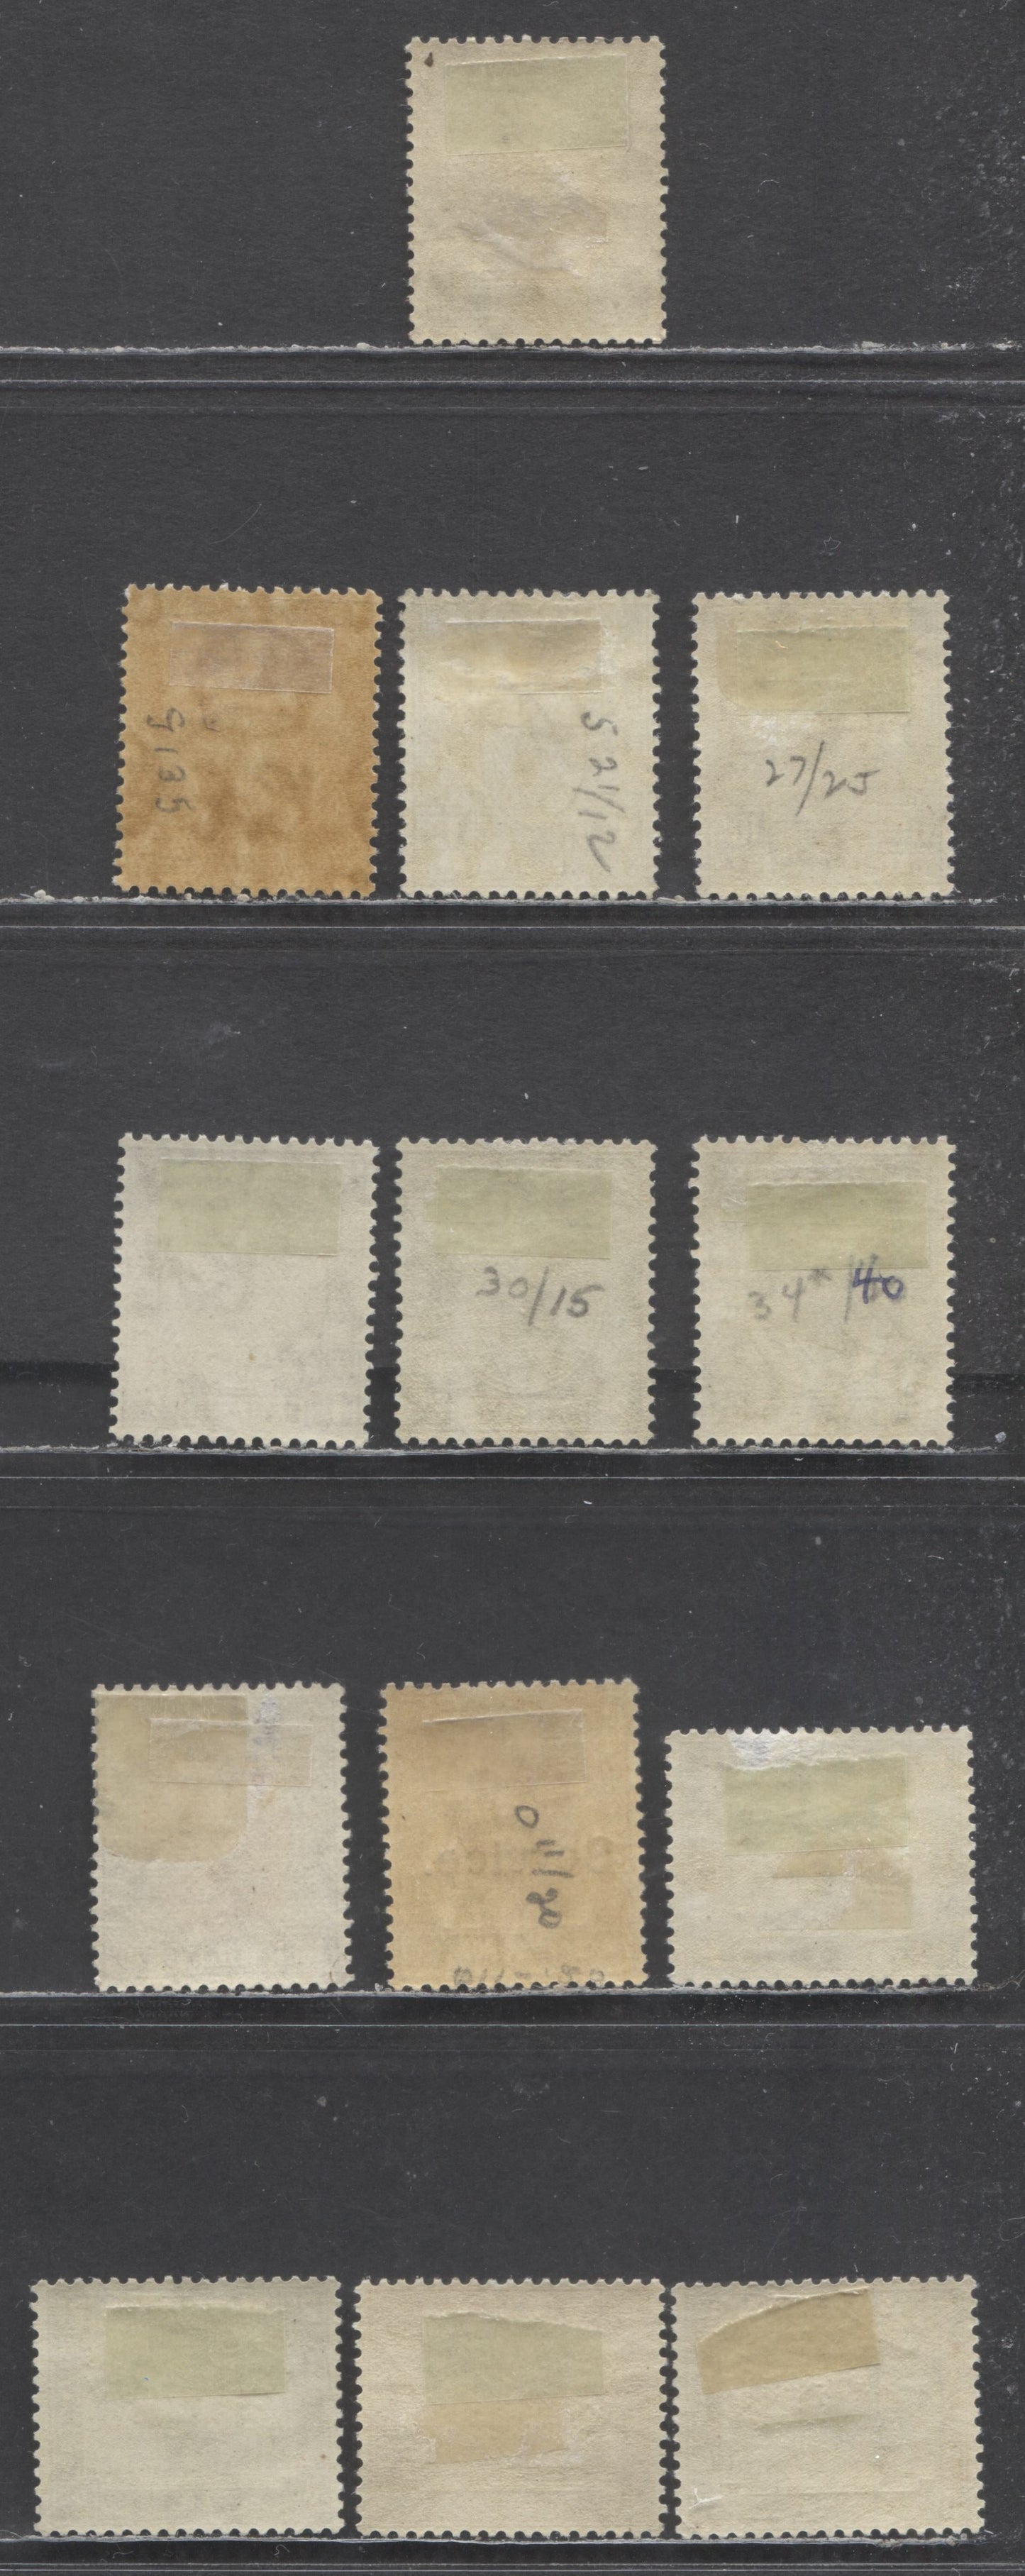 Lot 9 Malaya States SC#21/O11 1897-1941 Various Issues, 13 F/VFOG Singles, Click on Listing to See ALL Pictures, Estimated Value $12